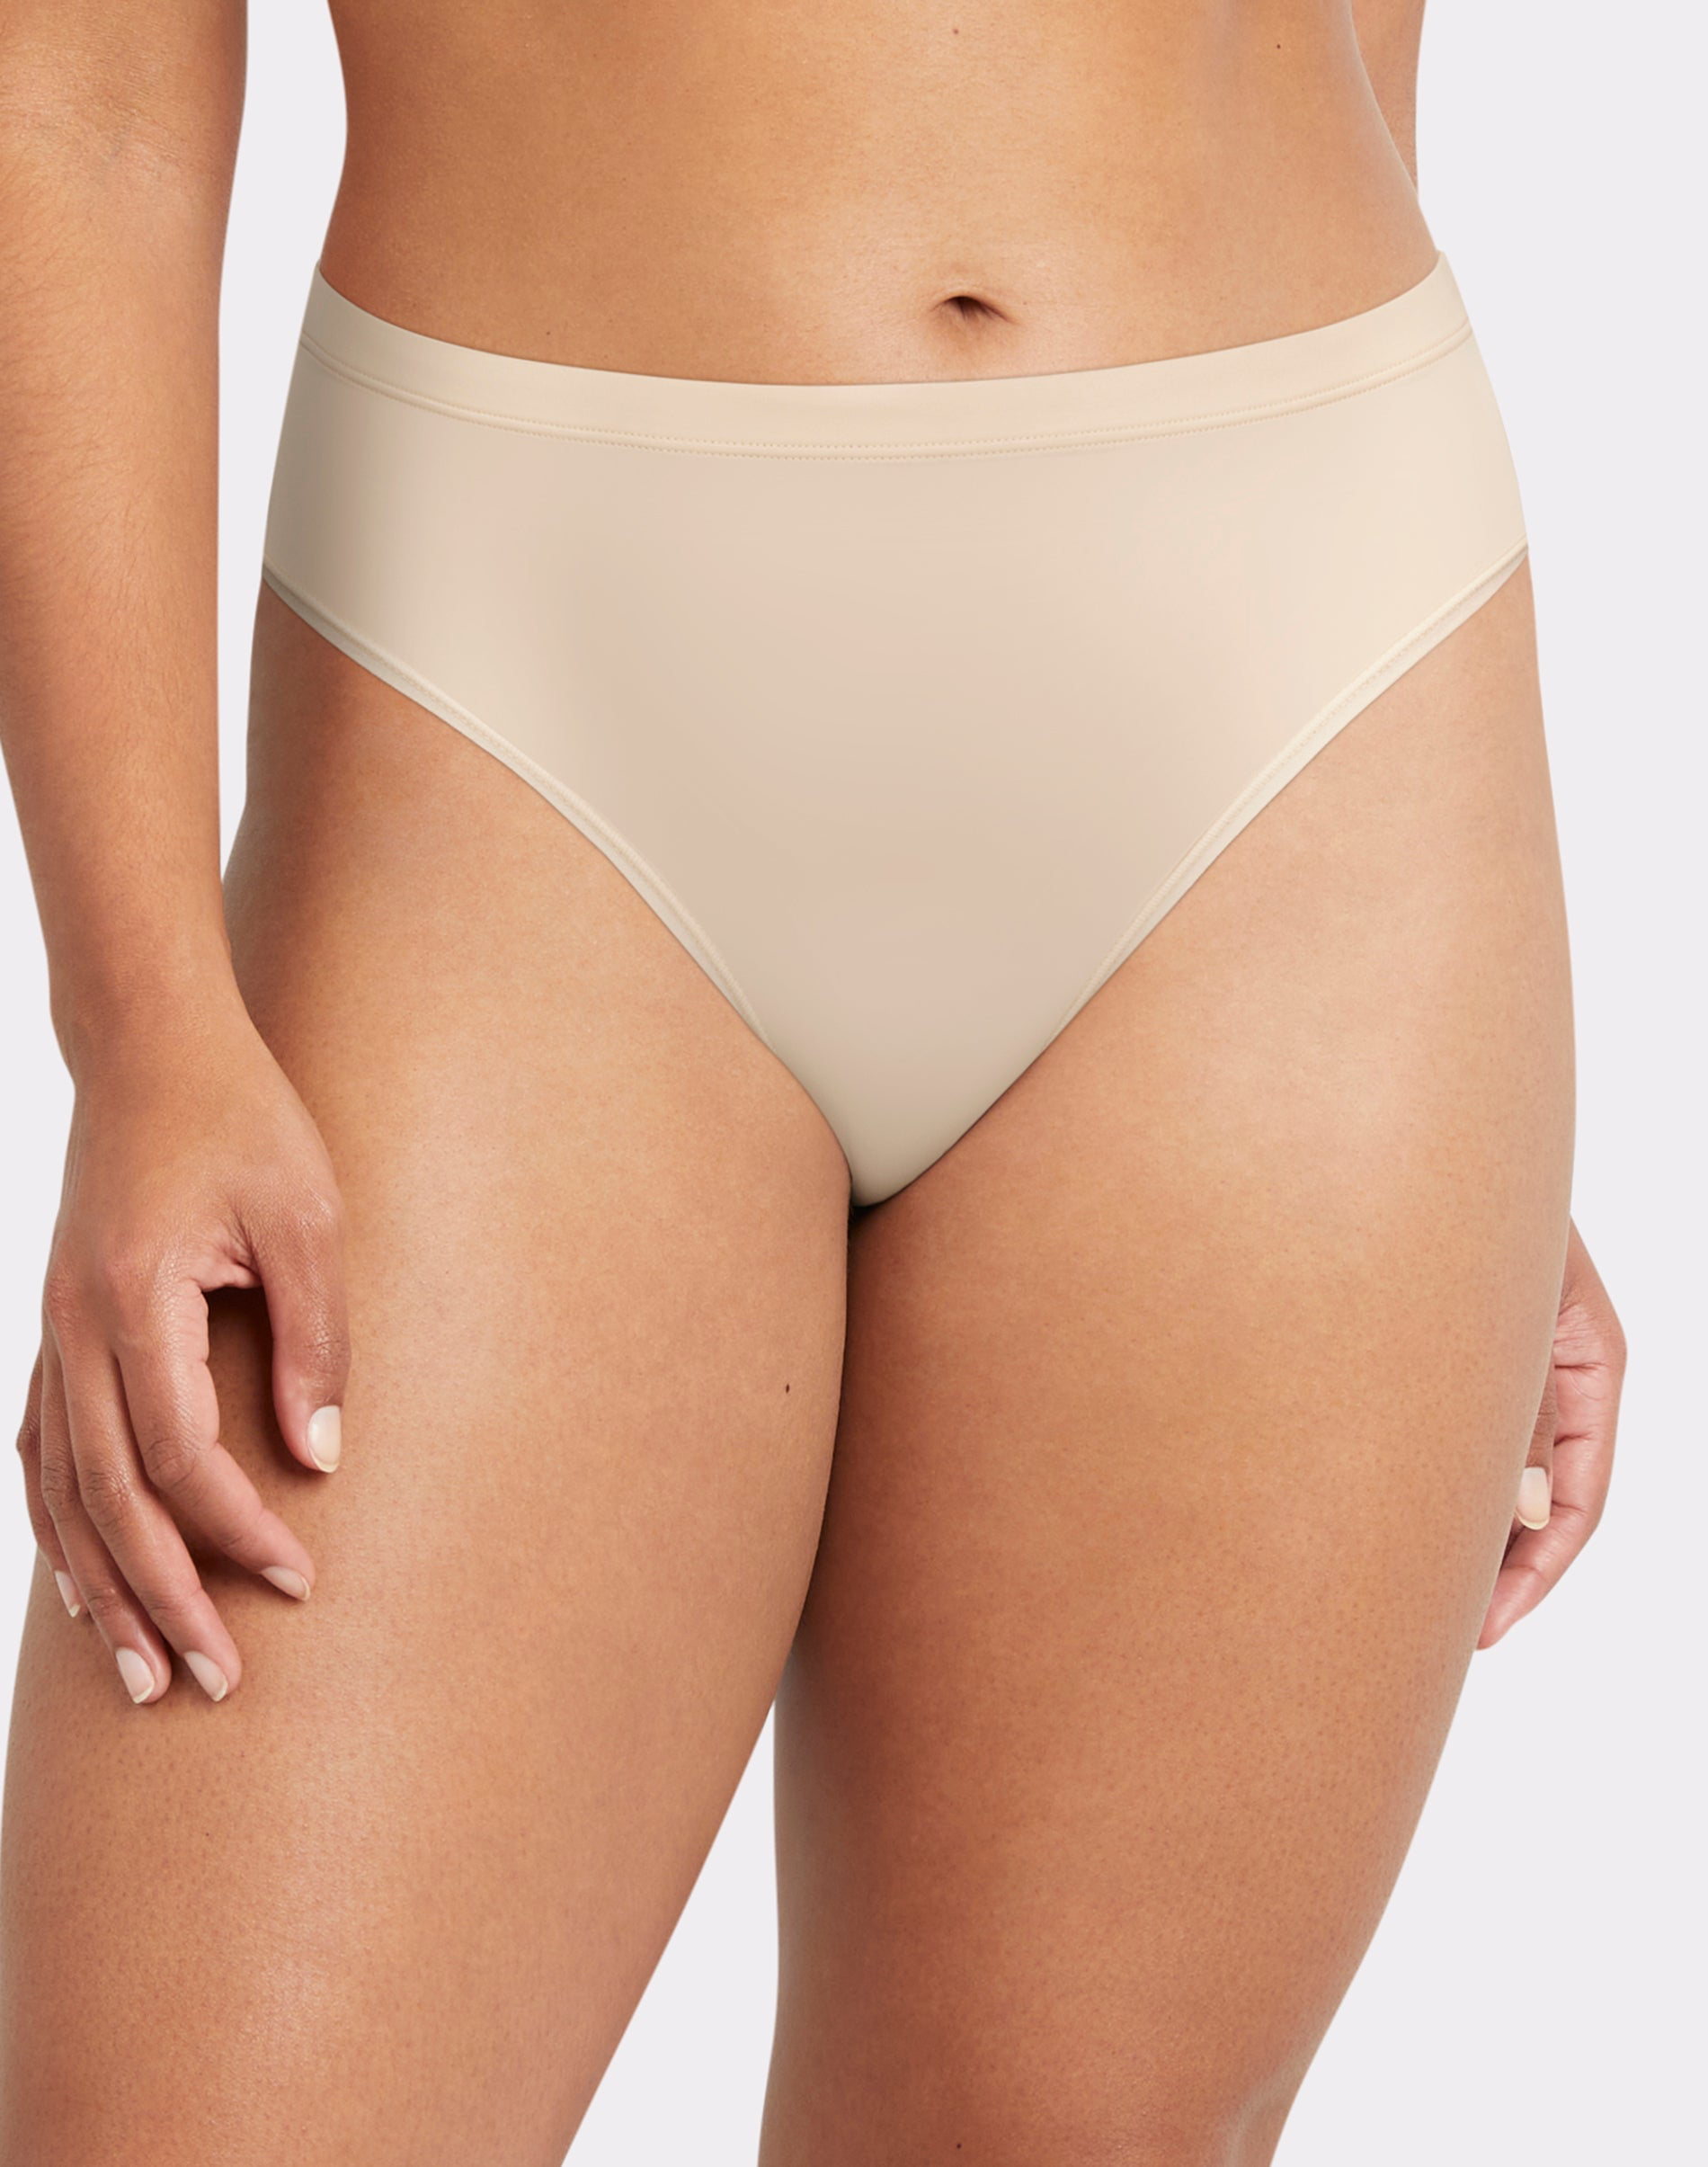 Women's Maidenform DMBTHB Barely There Invisible Look Hi Leg Panty (Almond 7)  